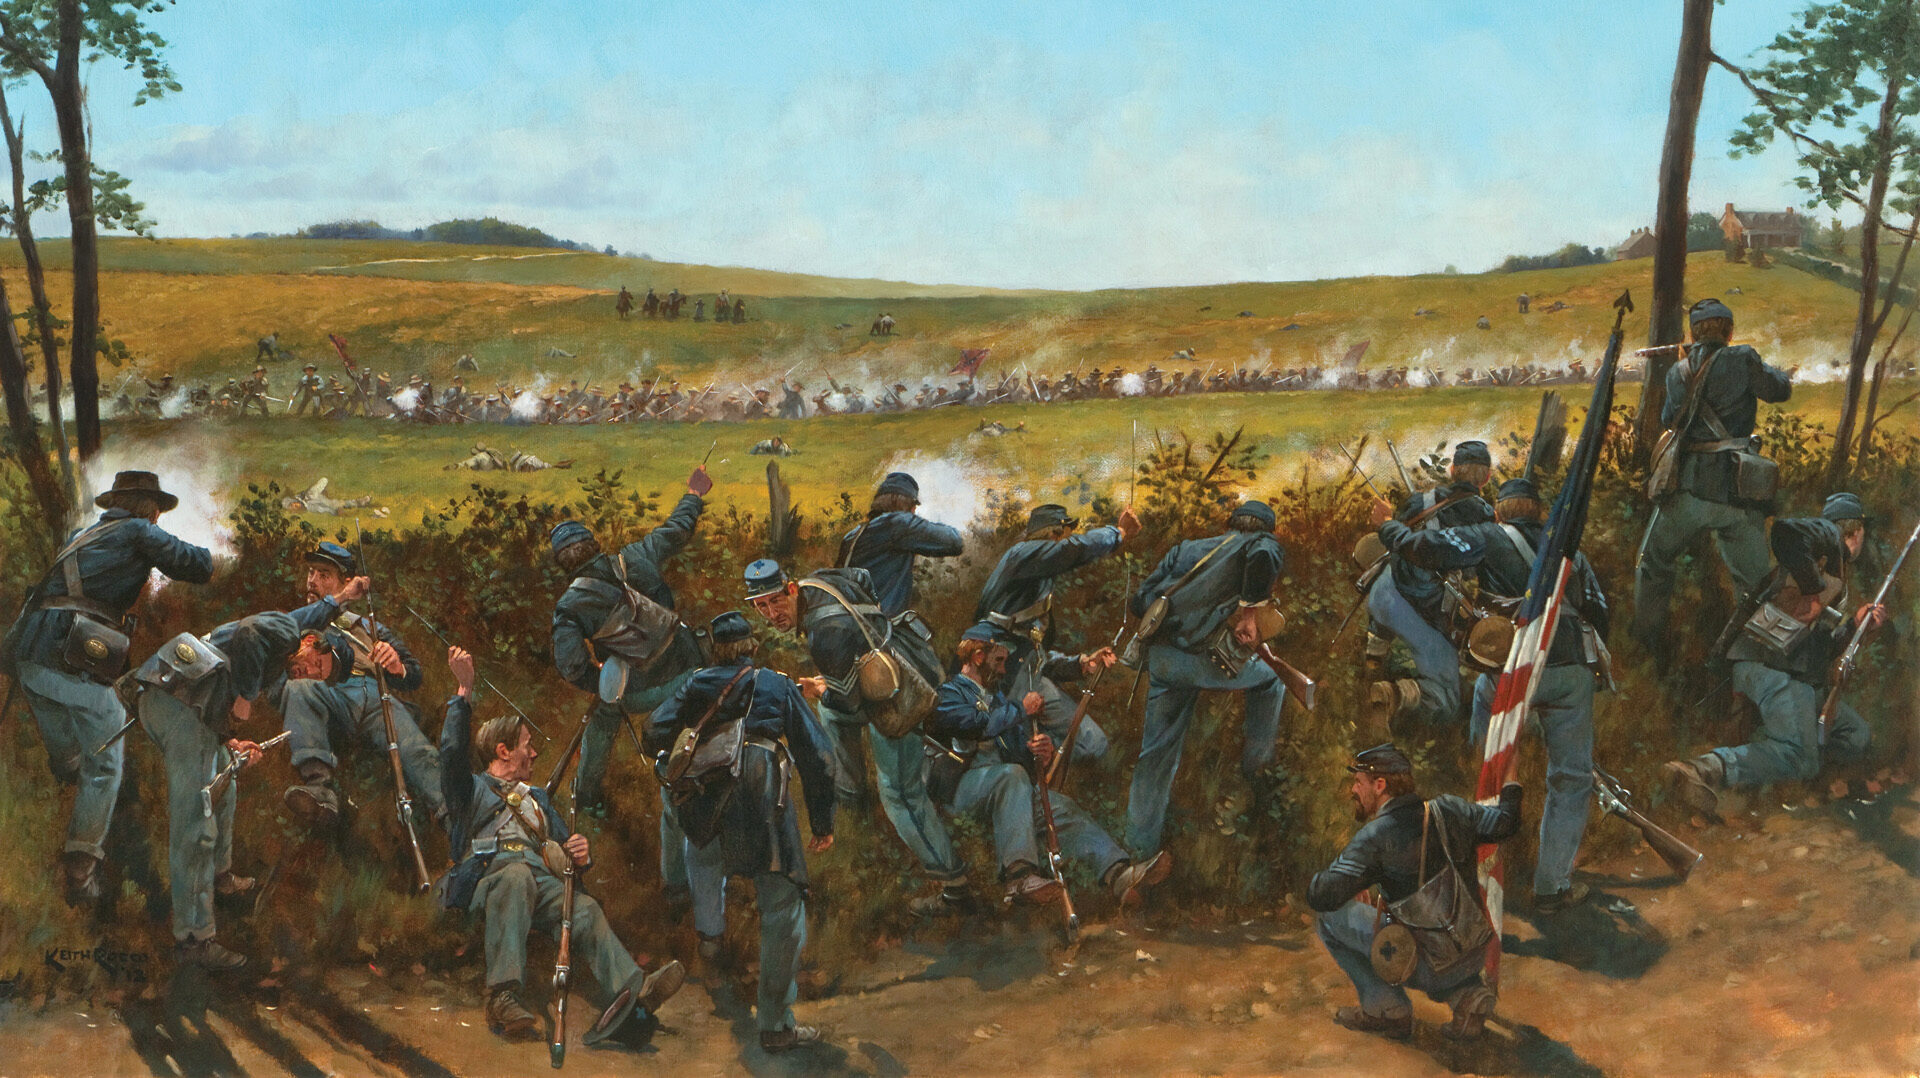 Veteran Union troops take up a strong position in a ditch as Confederates stream down a hillside on the Thomas Farm in an effort to uncover river crossings for the rest of Lt. Gen. Jubal Early’s Confederate army at the Battle of Monocacy.